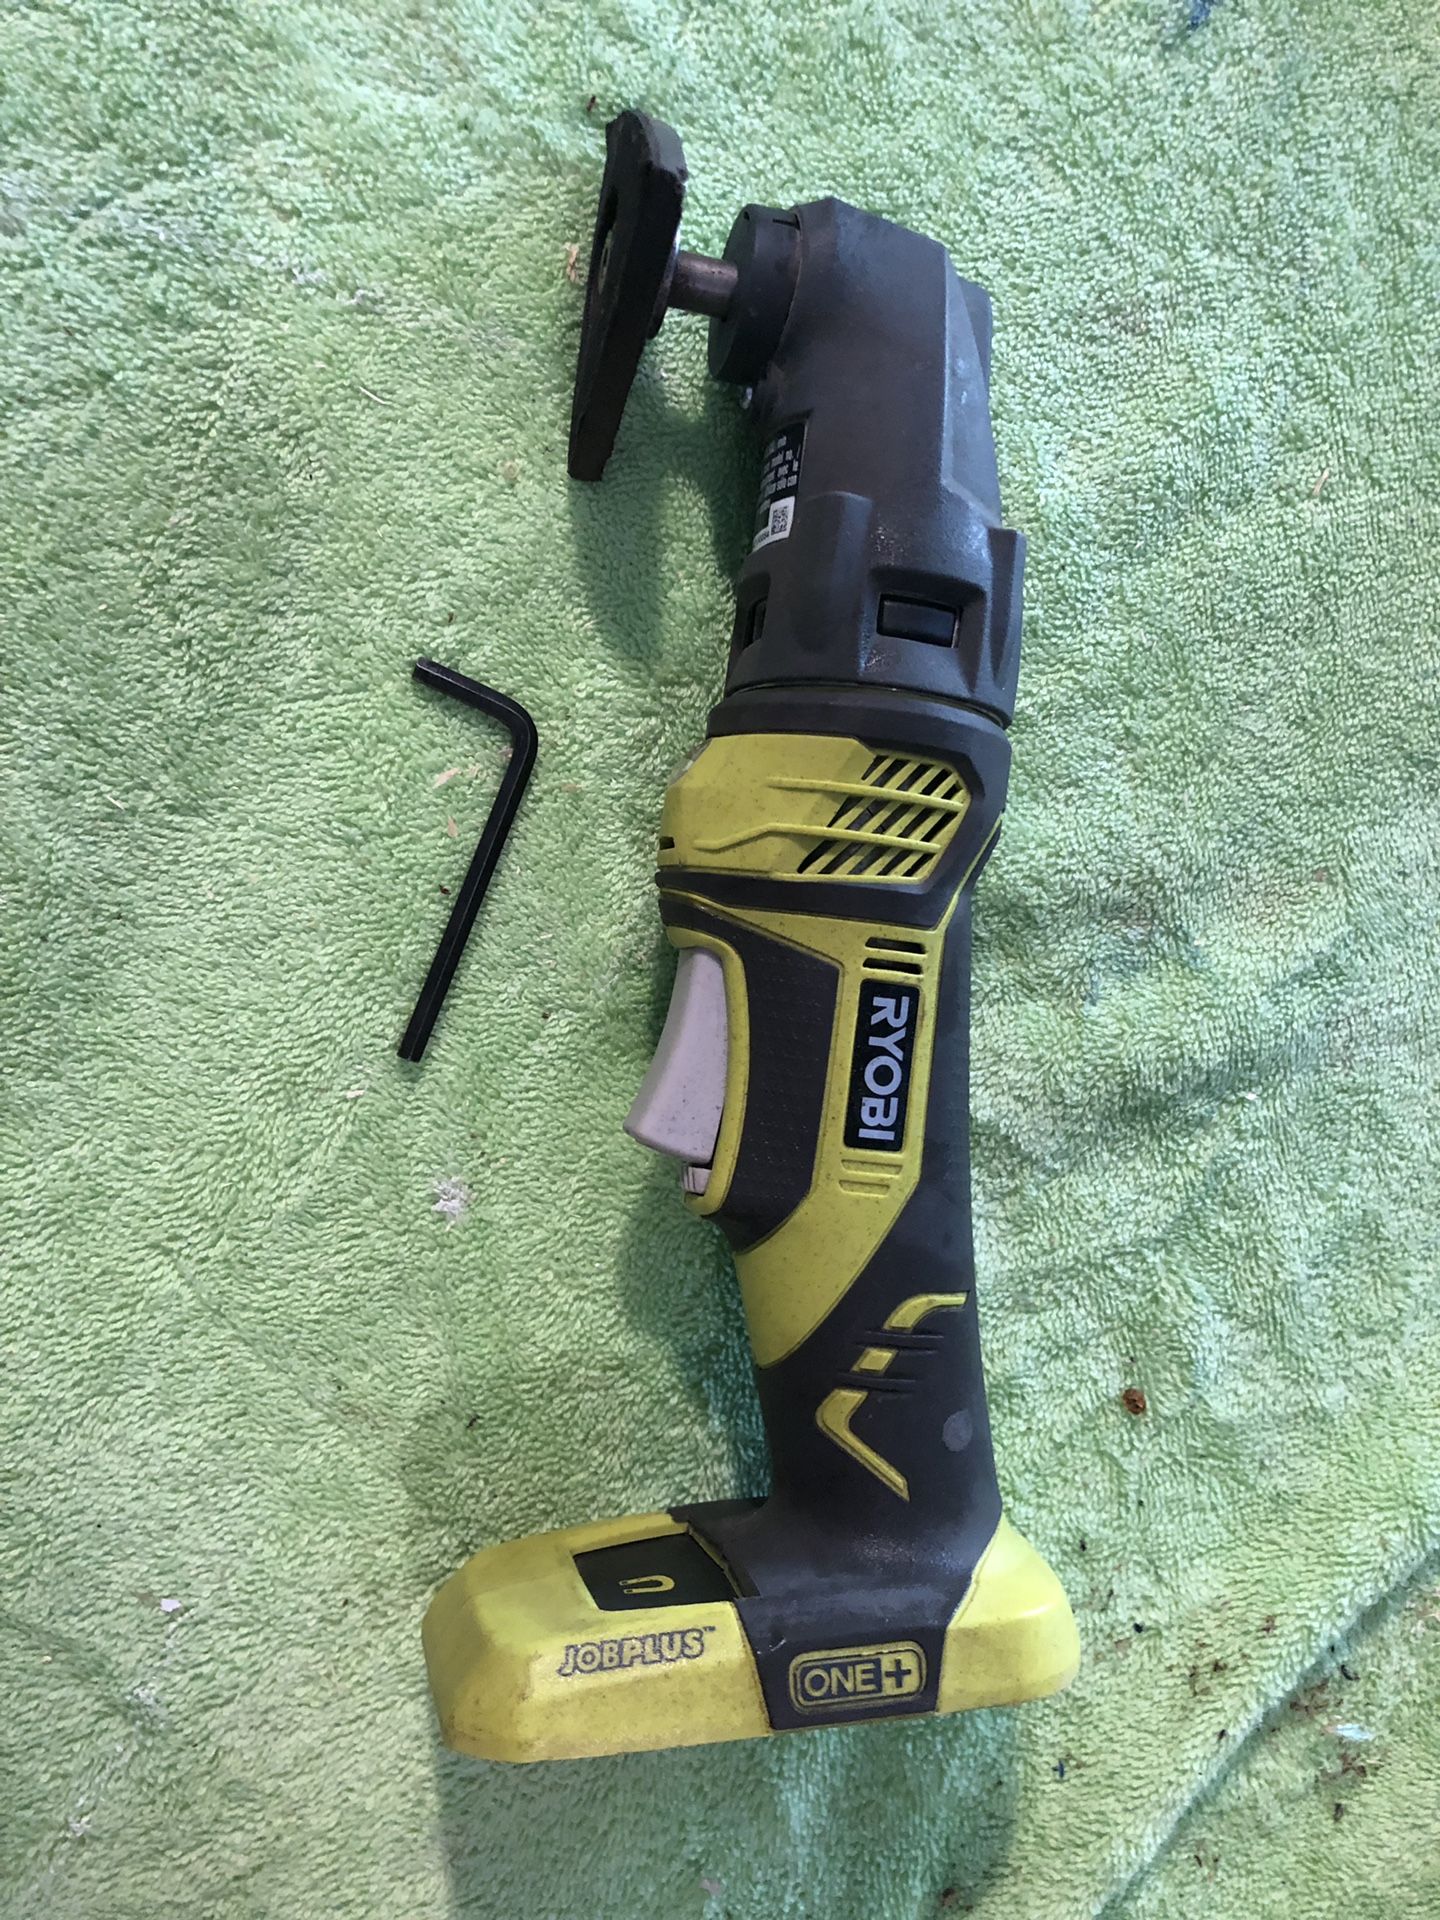 Ryobi One+ 18volt Multitool with battery